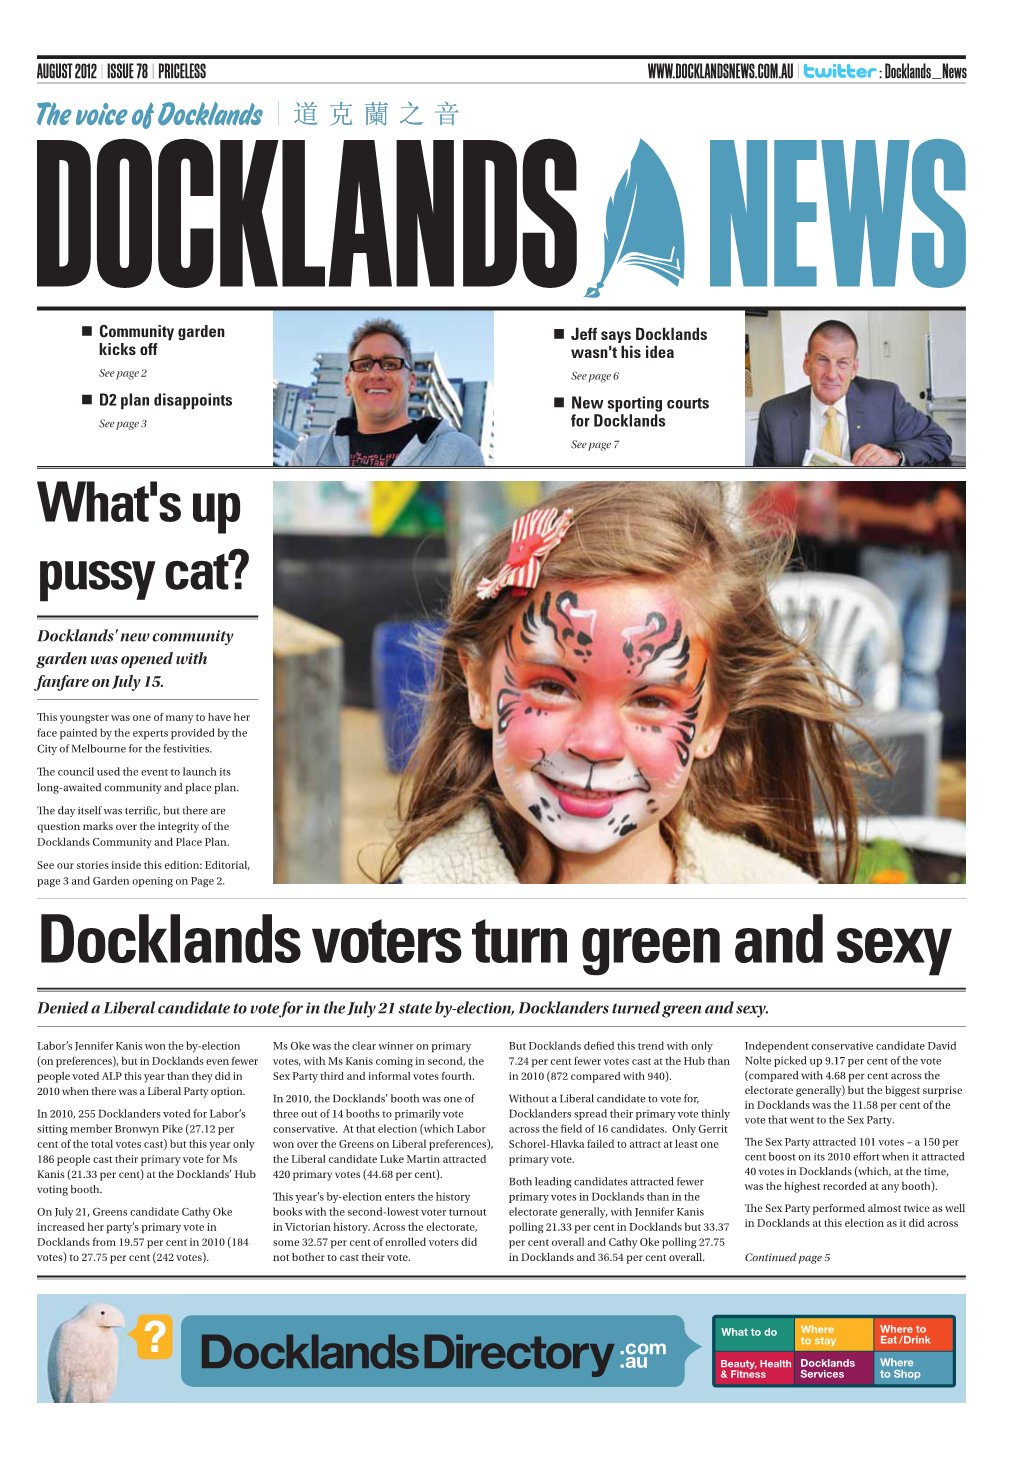 Docklands Voters Turn Green and Sexy